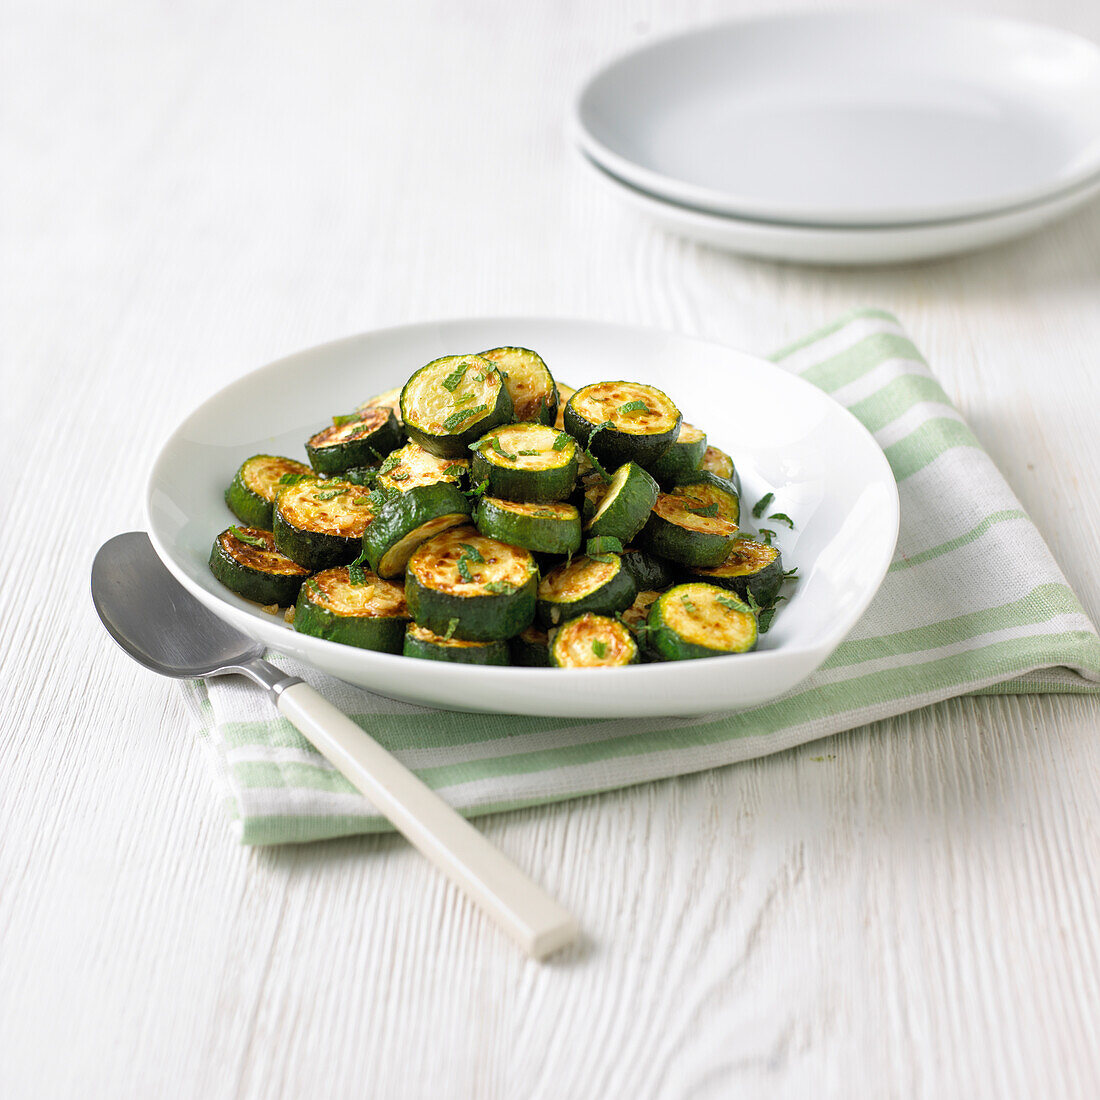 Courgette with garlic and mint